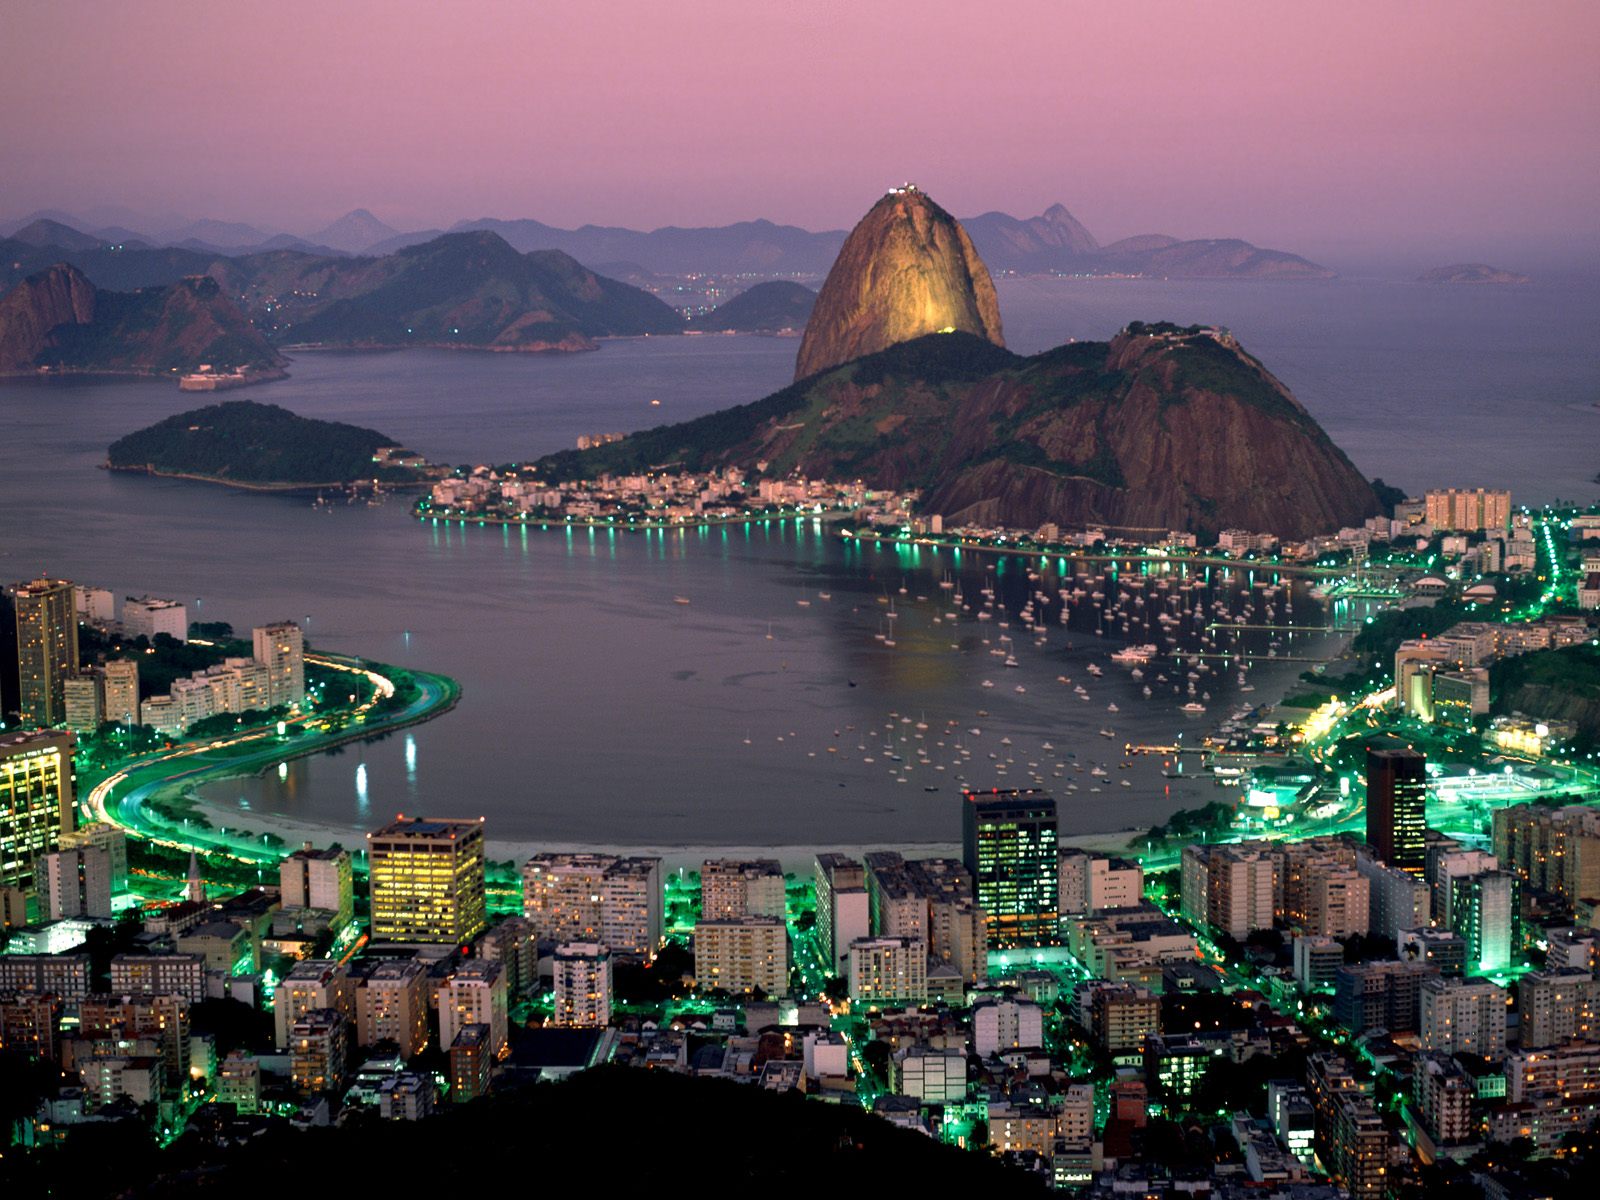 Brazil HD Wallpaper Check Out The Cool Image High